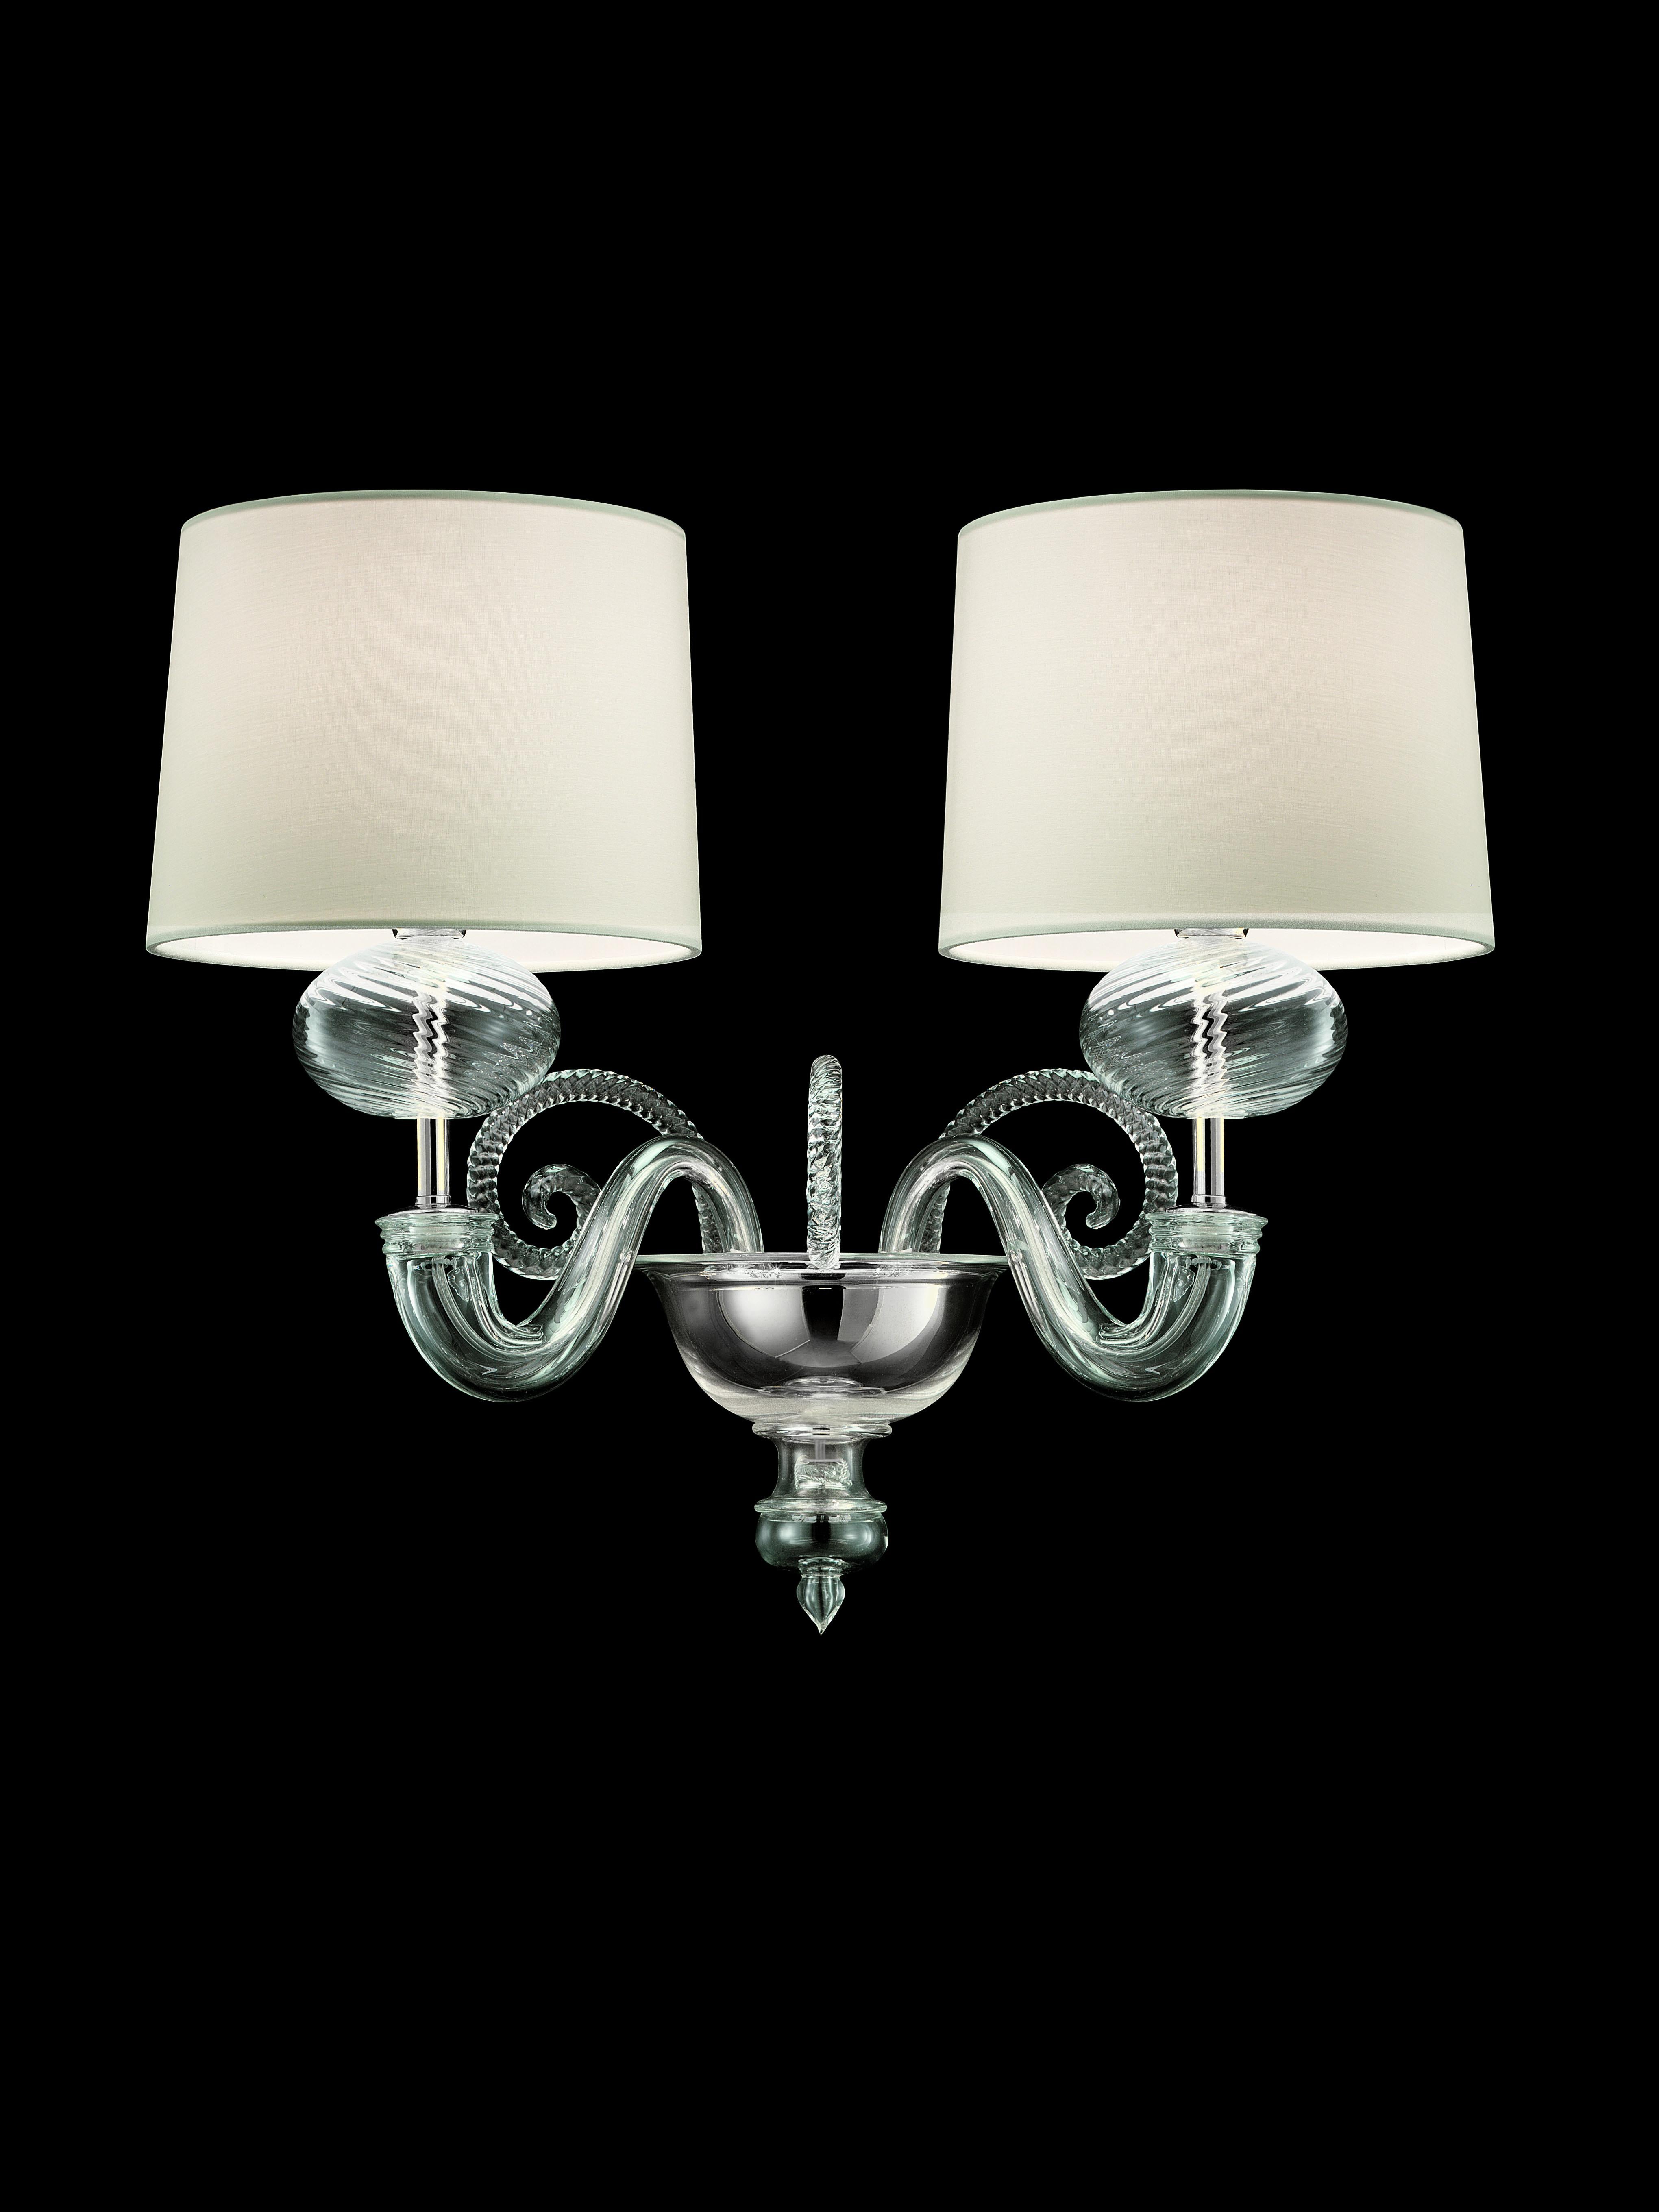 Shown here is the Tangeri 5604 02 wall sconce in crystal glass and a polished chrome finish, with a White Shade. The light collection was inspired by the palaces and emotions of sunset in Morocco, Tangeri is a wall sconce with two arms in crystal